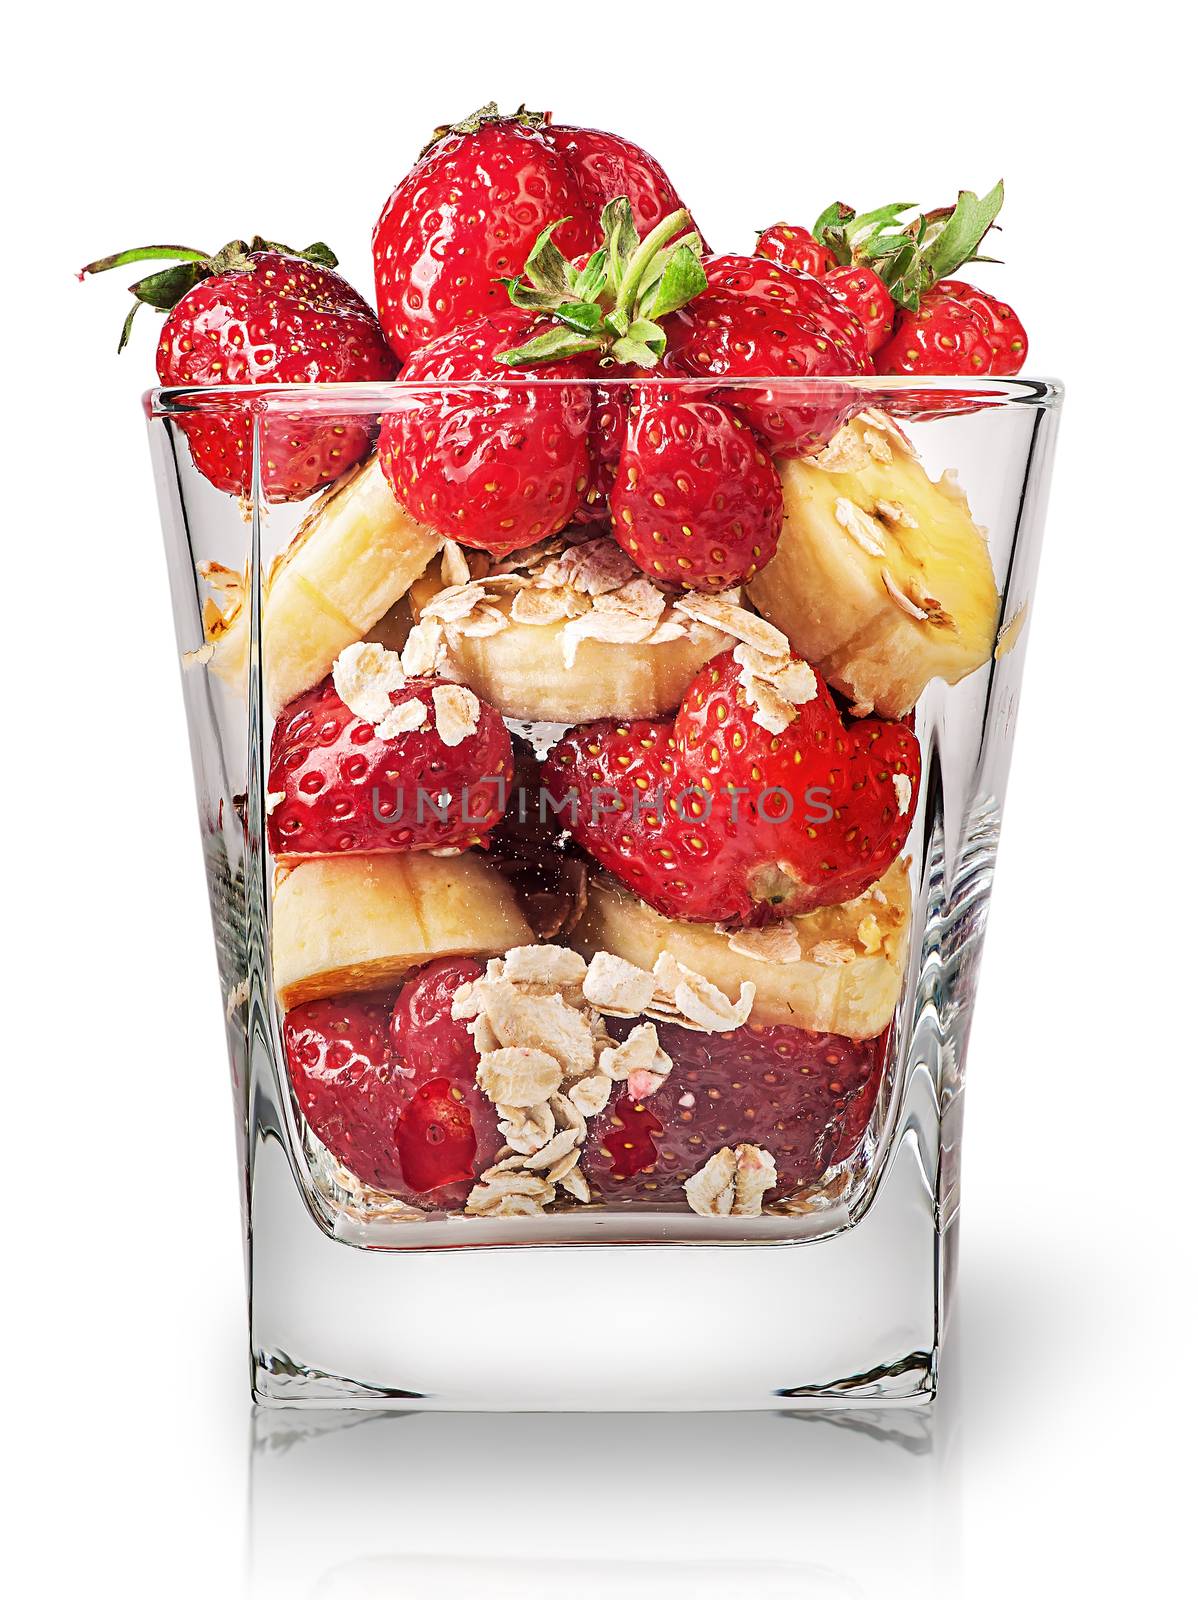 Strawberry and banana in glass by Cipariss